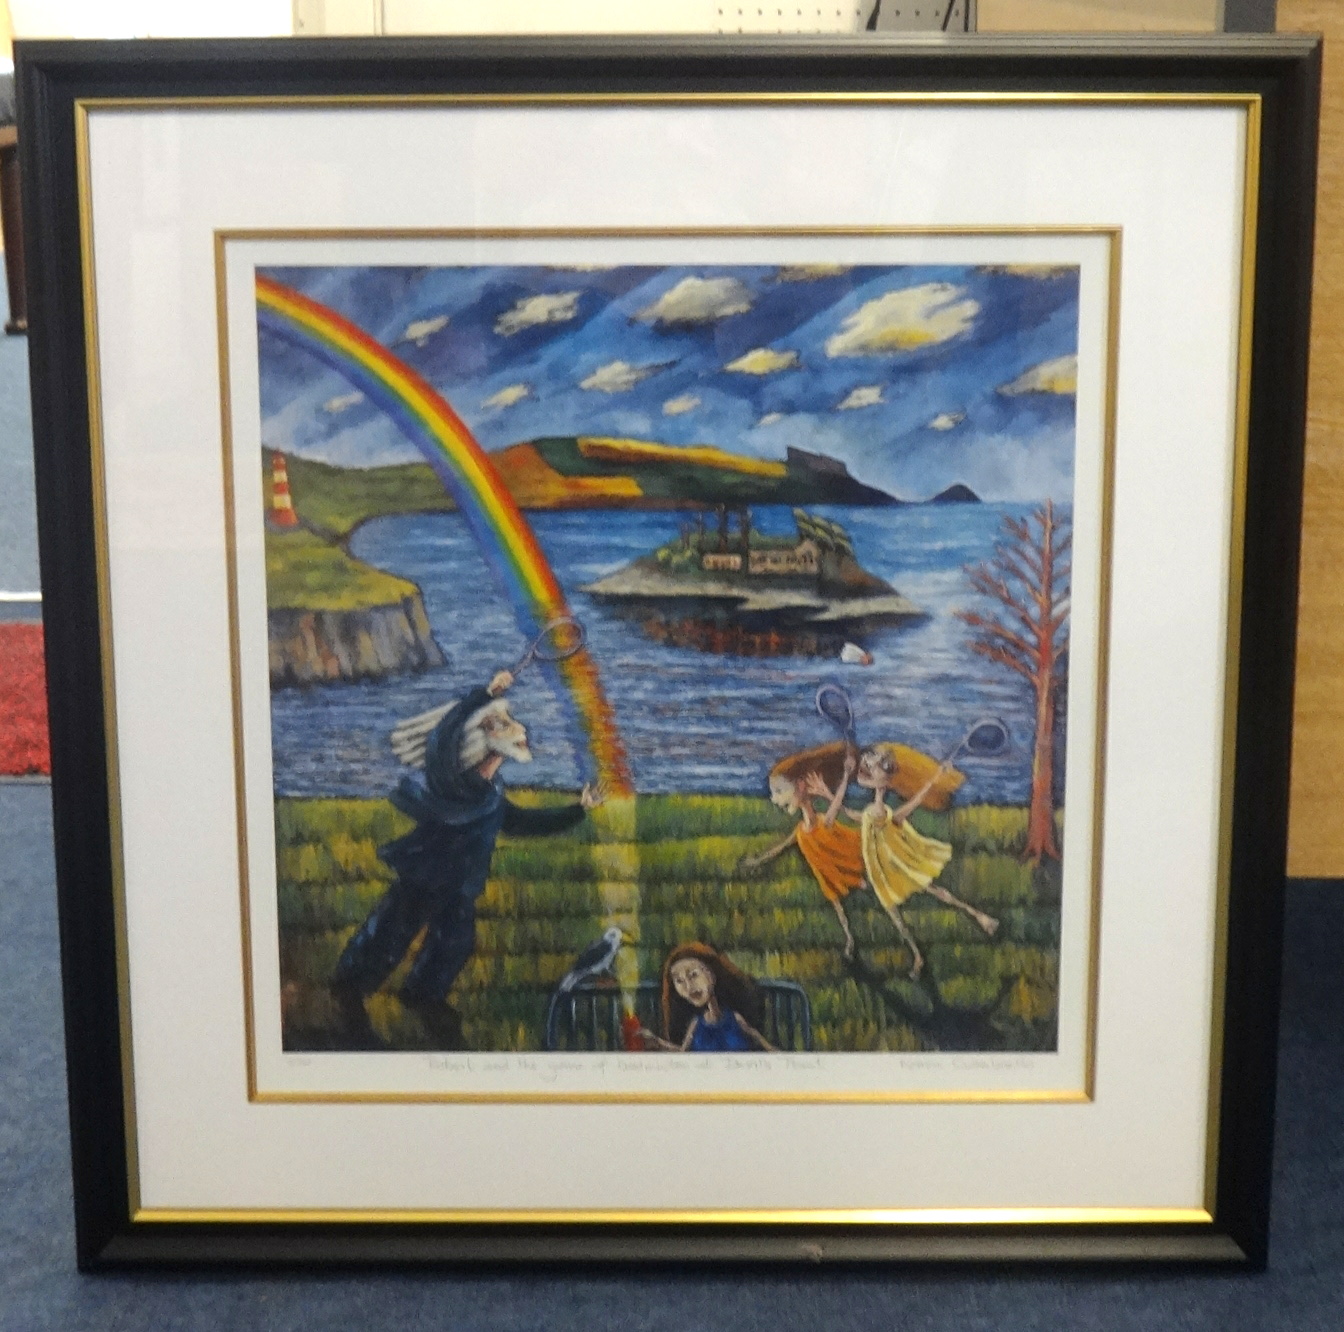 Karen Ciambriello, signed print 'Robert Lenkiewicz and a Game of Badminton at Devils Point' No 7/ - Image 2 of 2